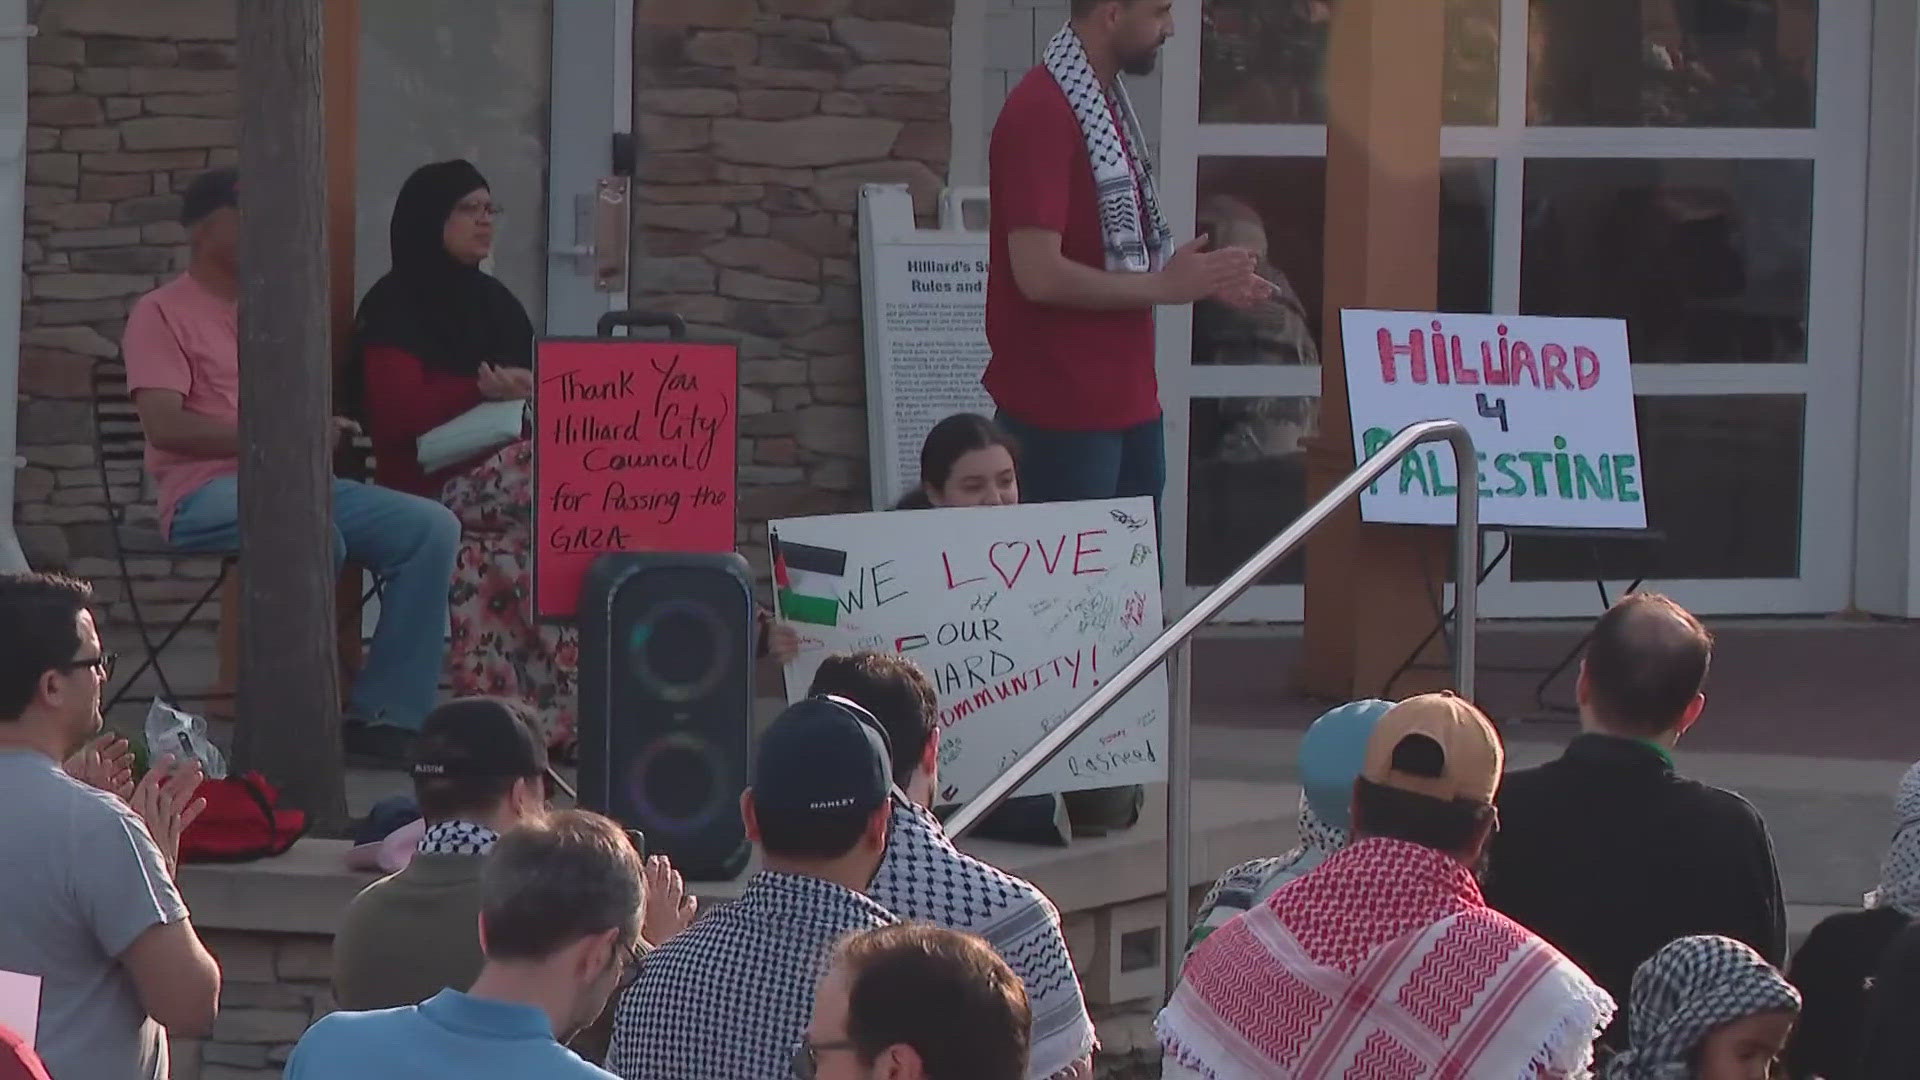 This week, Hilliard city council passed a resolution calling for a cease-fire in Gaza.